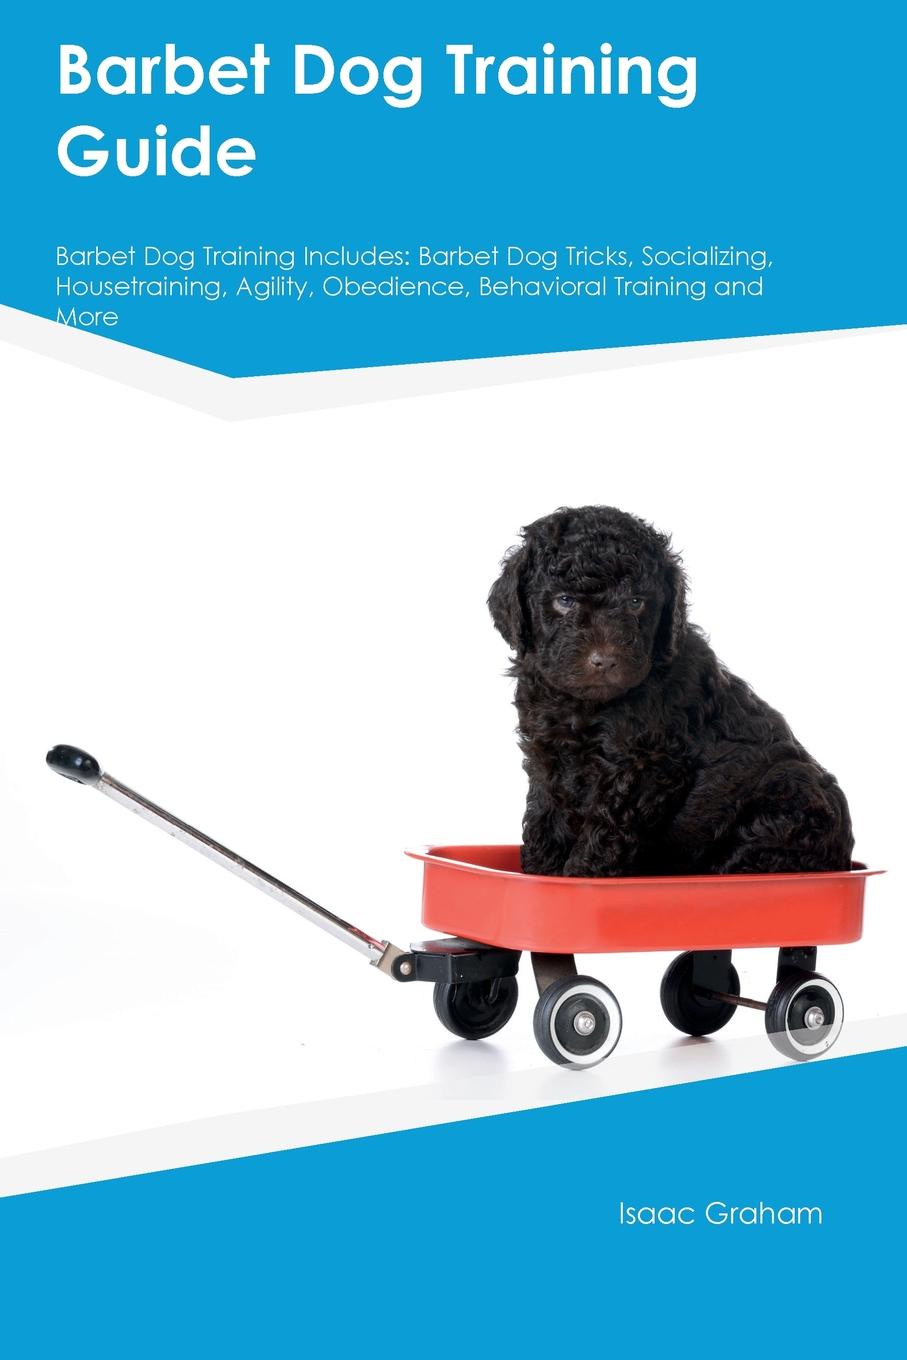 Barbet Dog Training Guide Barbet Dog Training Includes. Barbet Dog Tricks, Socializing, Housetraining, Agility, Obedience, Behavioral Training and More